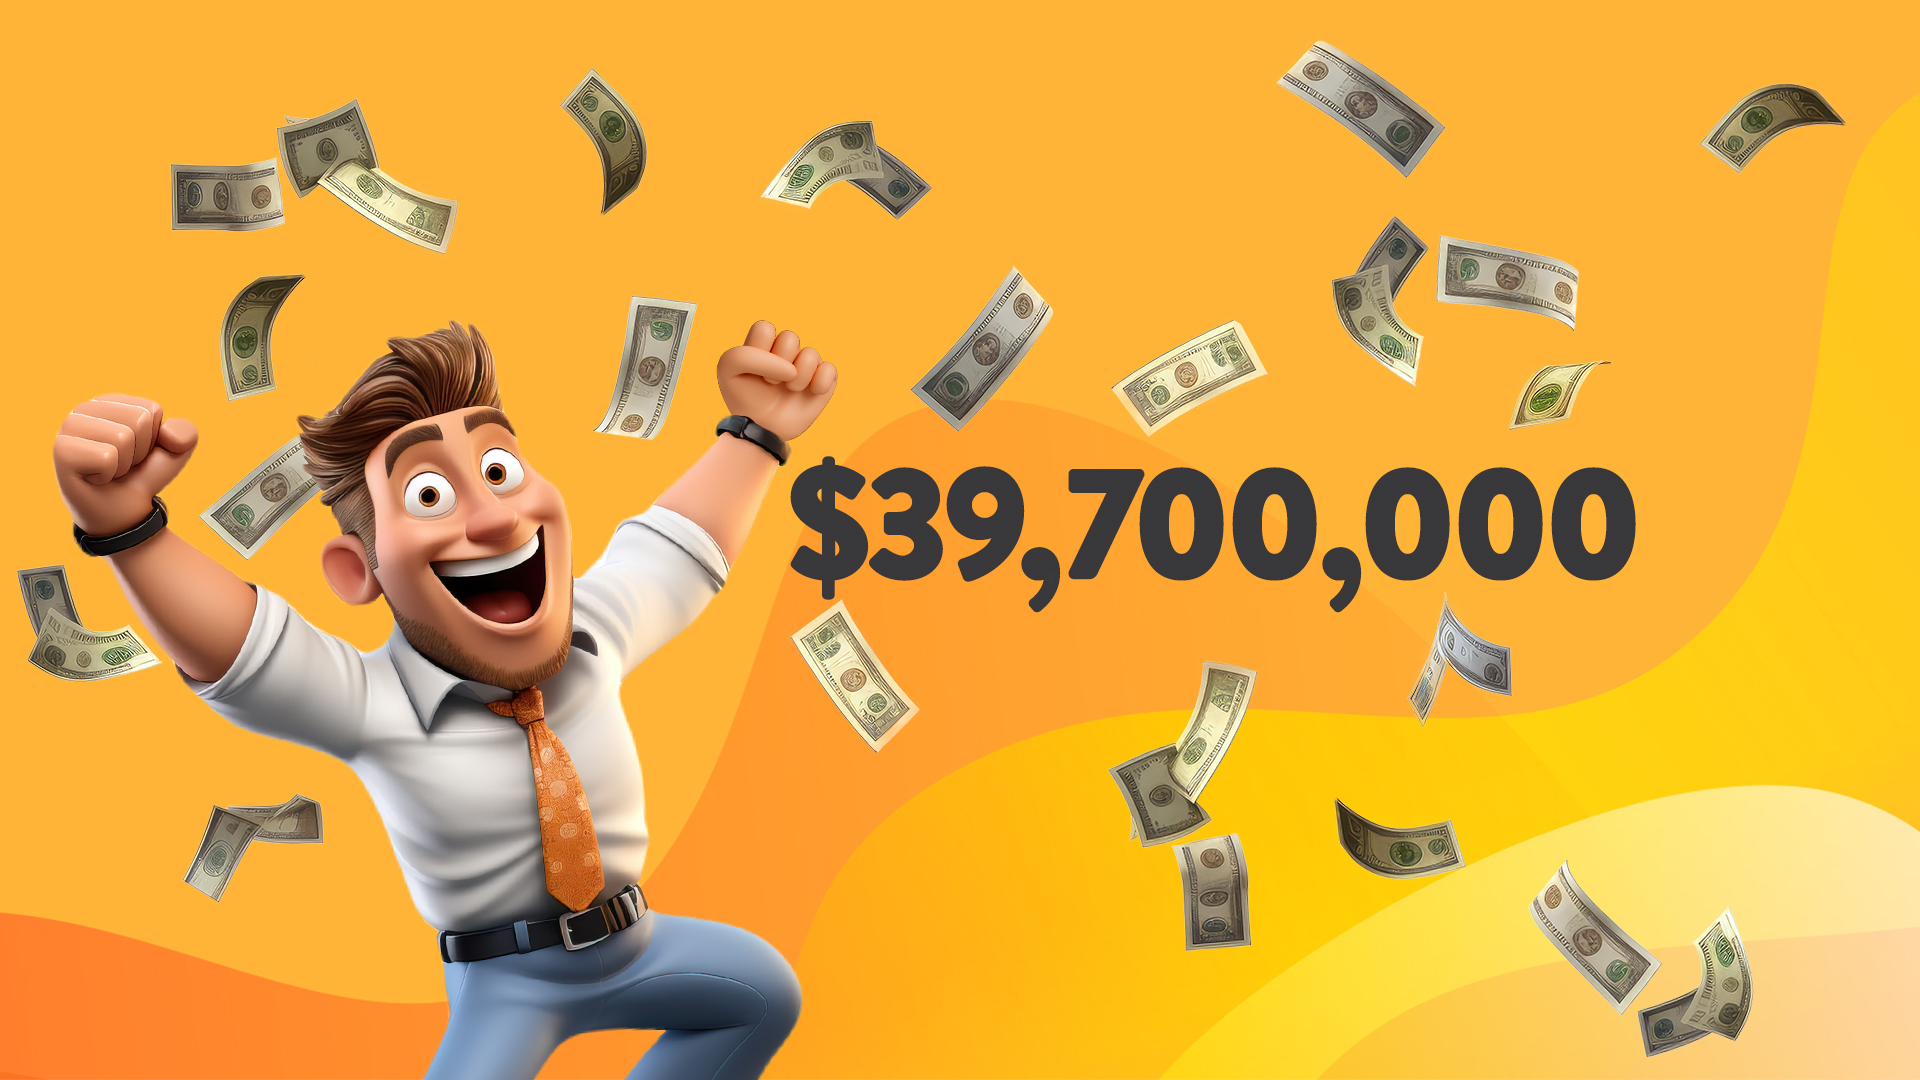 A man in a shirt and tie is leaping in joy within a cloud of cash and next to him is text that says ‘$39,700,000’ and it’s all on a yellow-orange background.